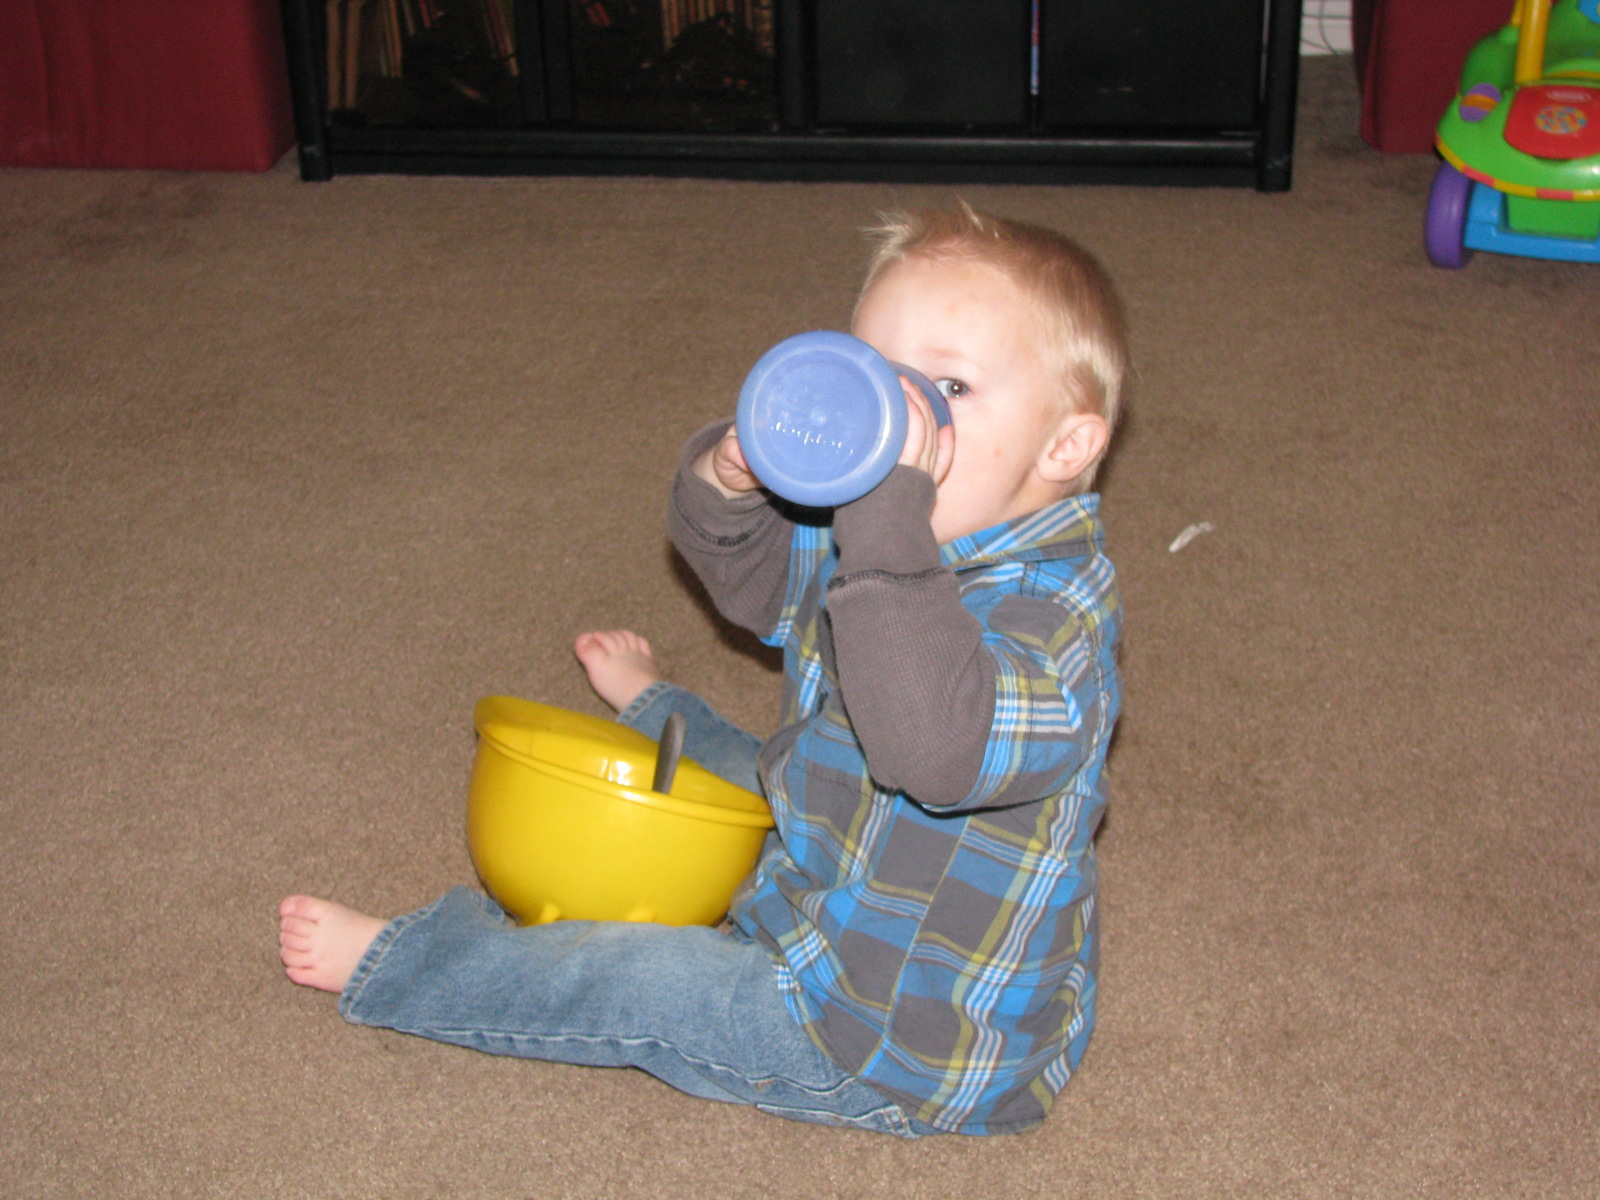 [The+sippy+cup+(2).jpg]